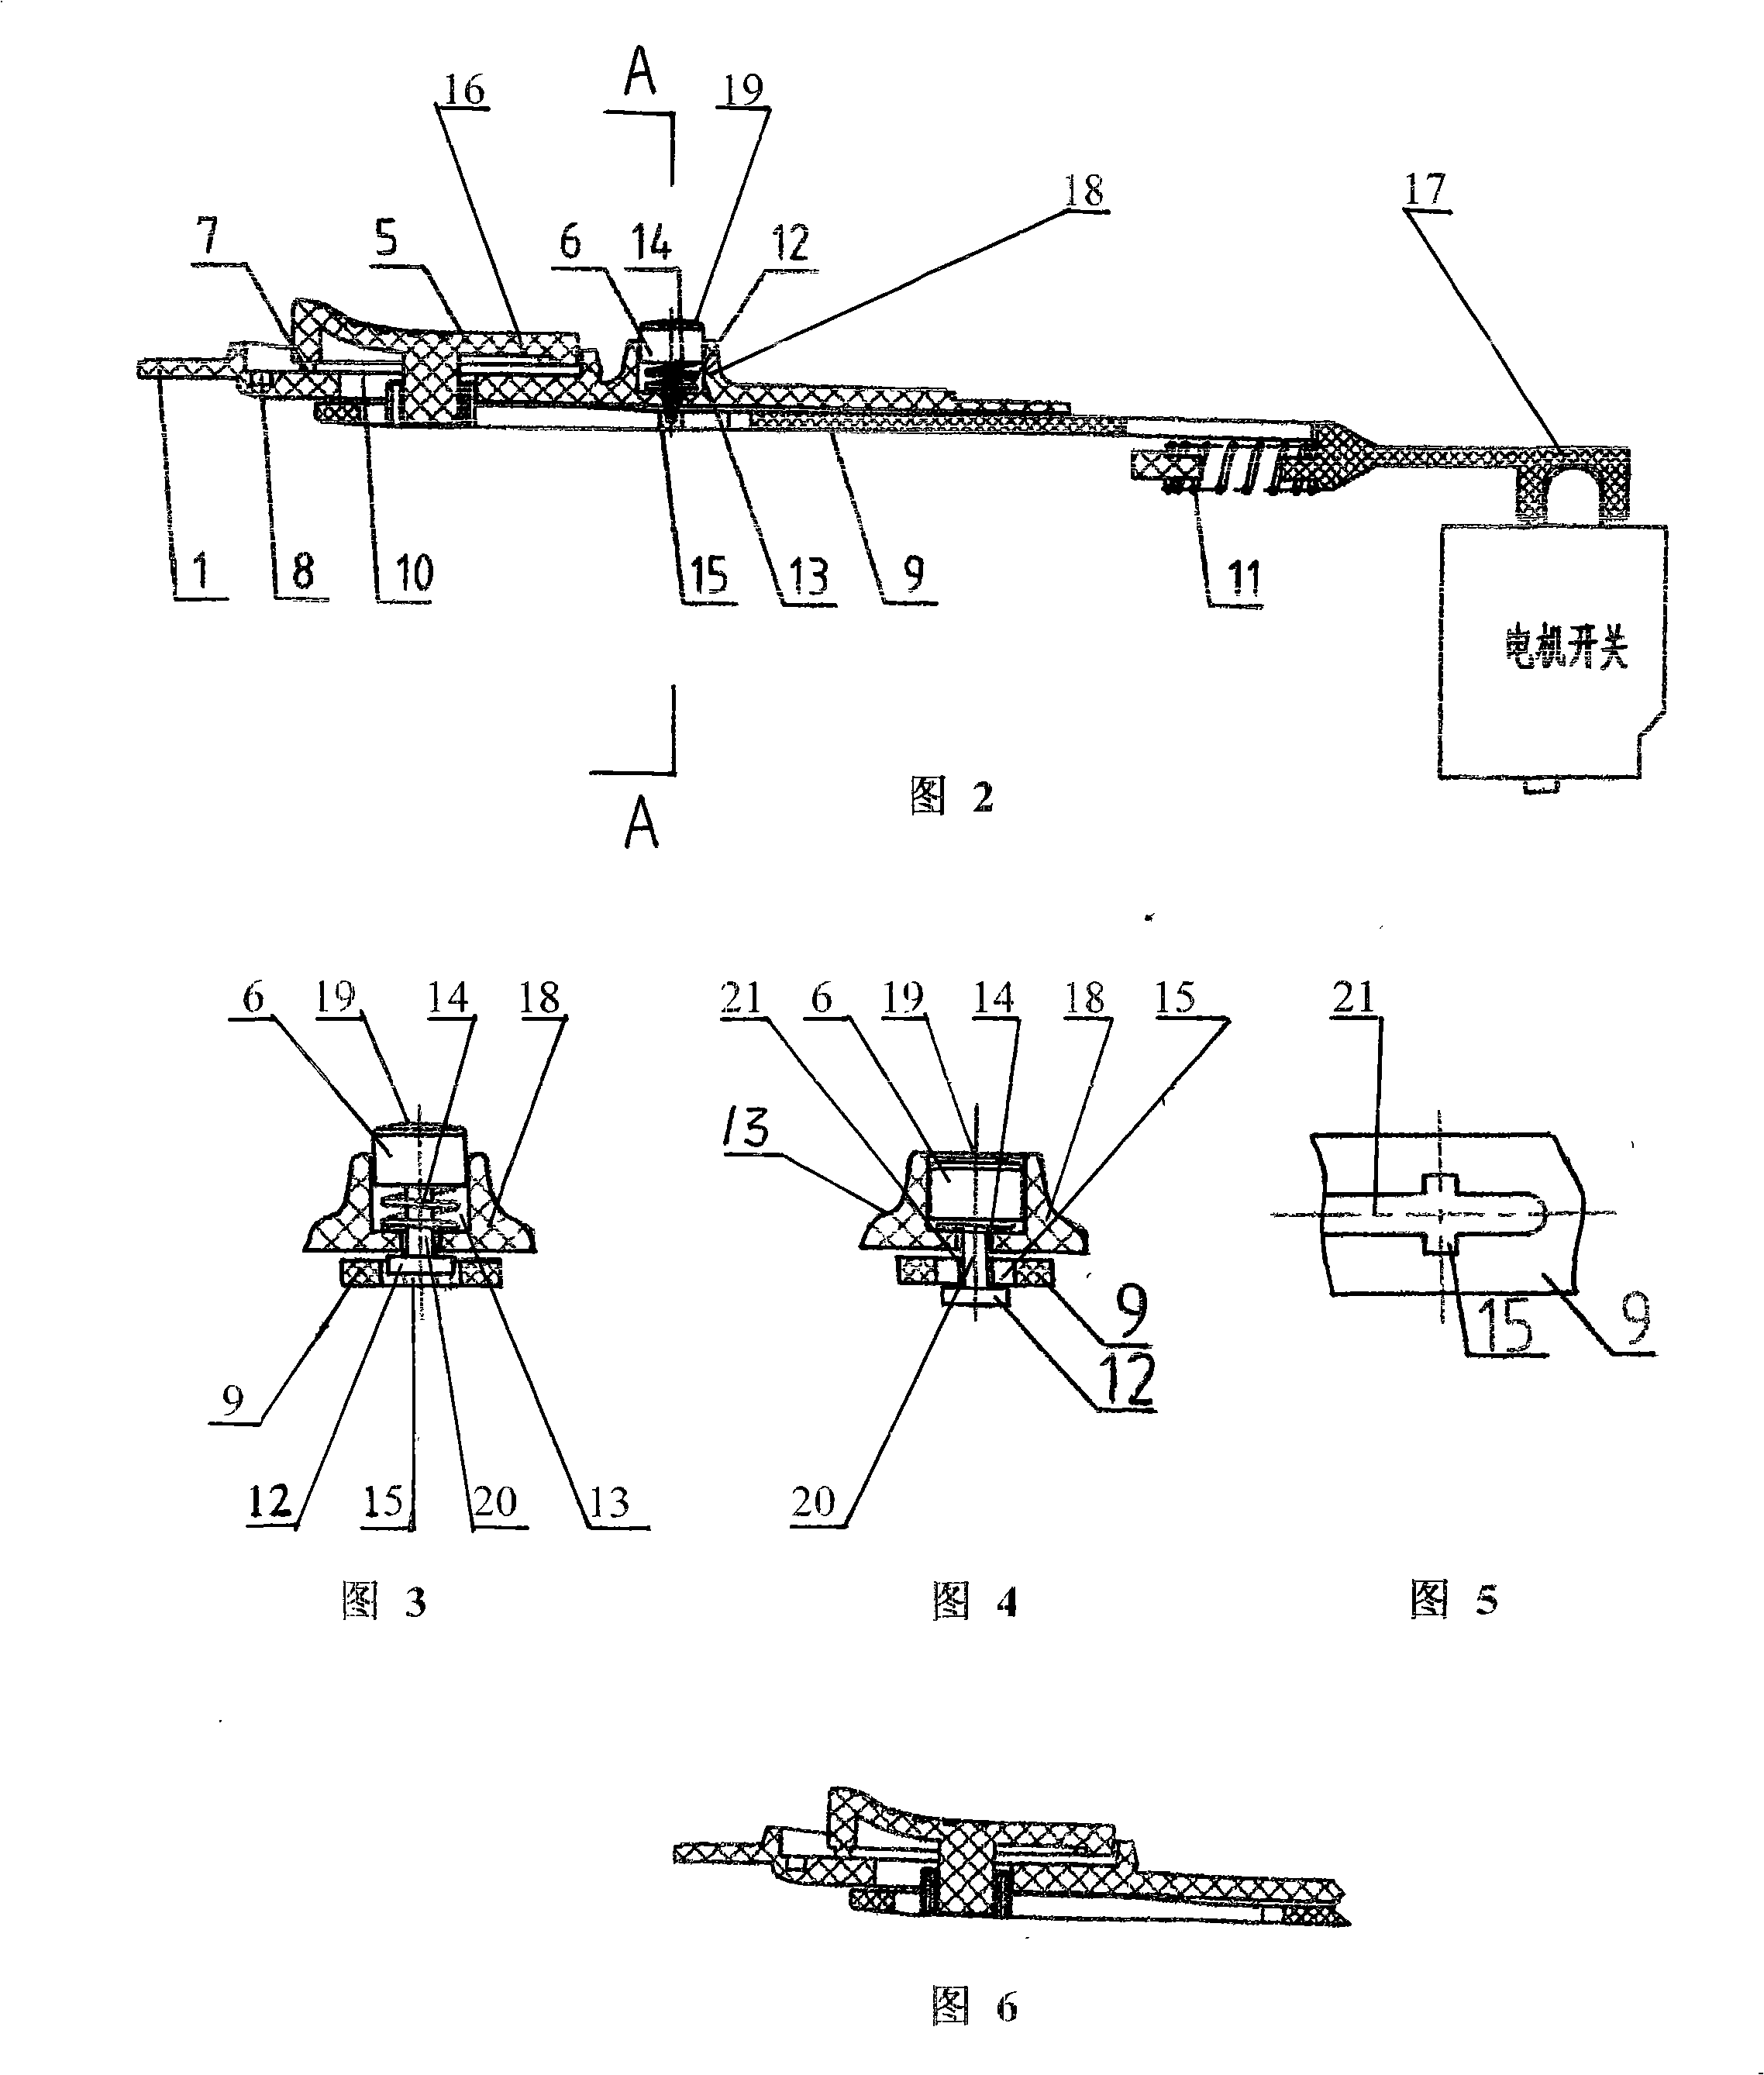 Electric angle grinder with secondary action unlocking mechanism